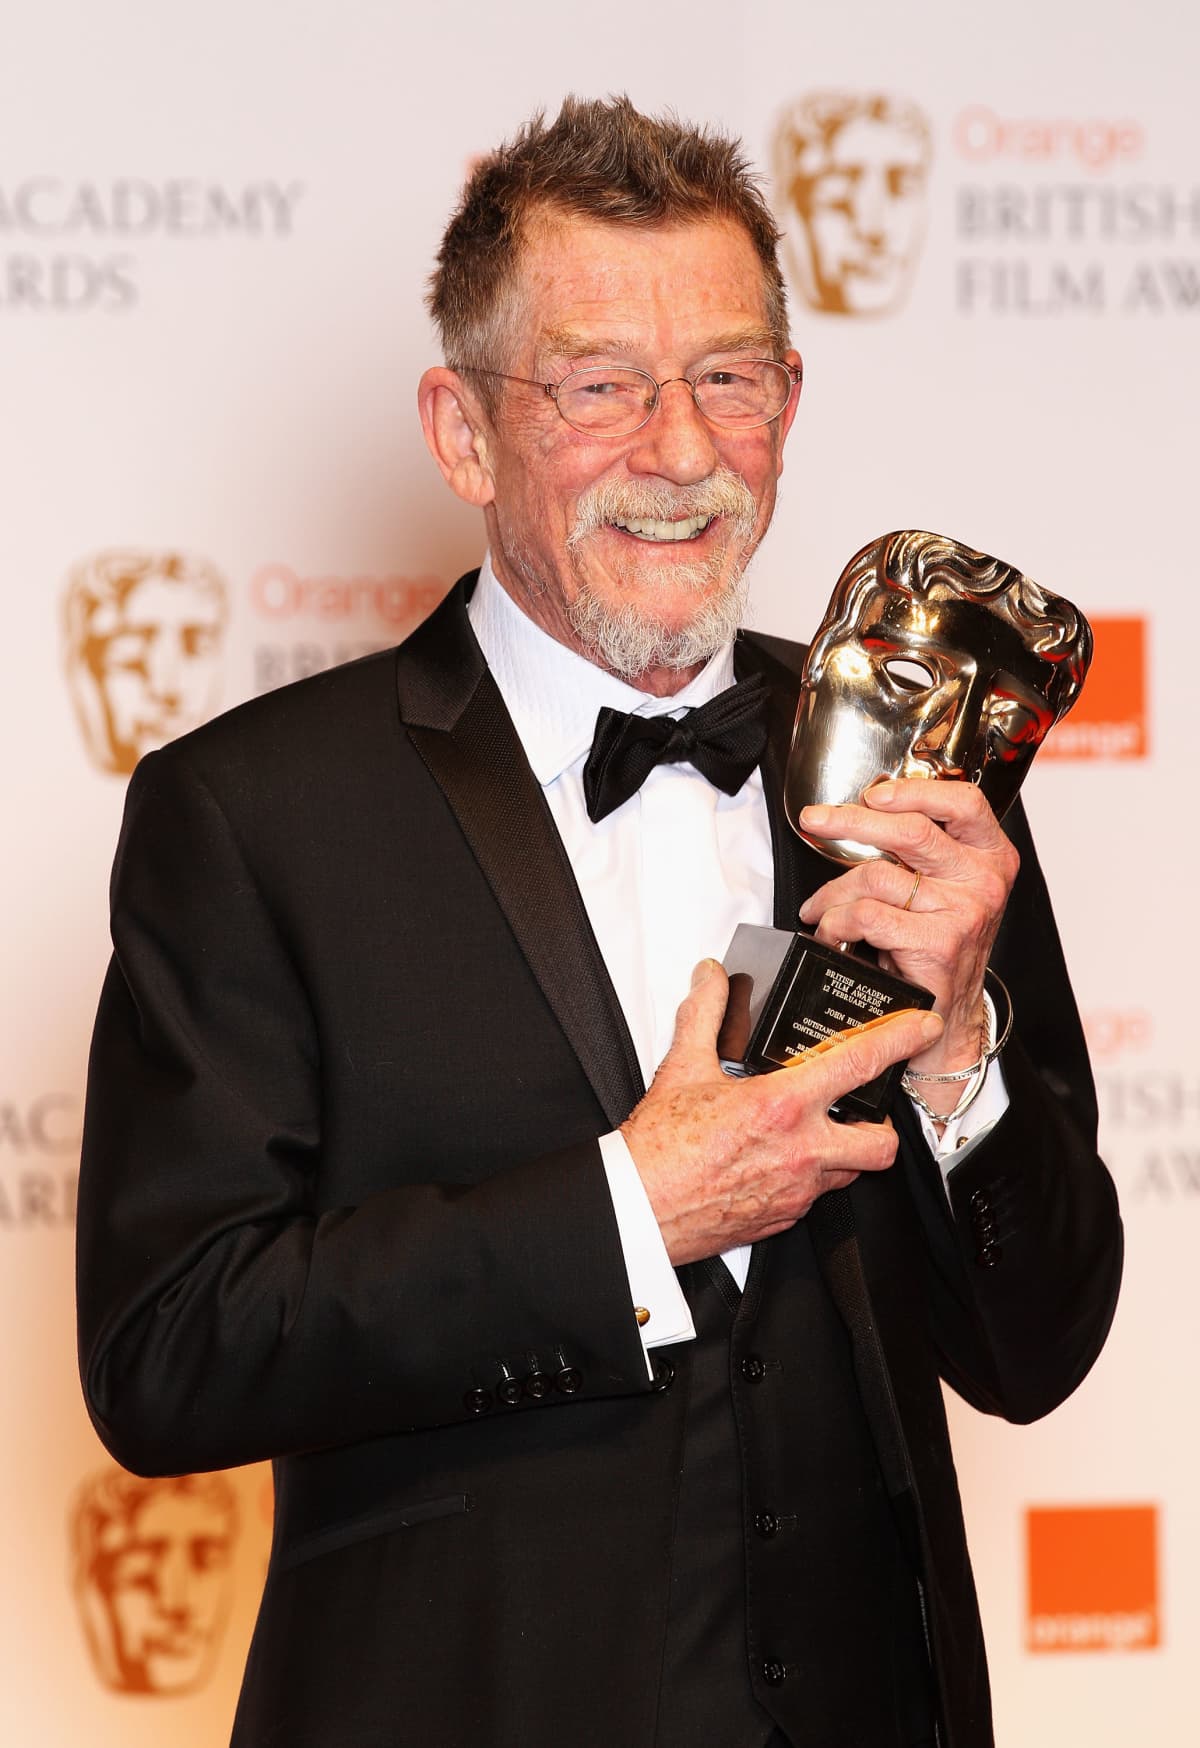 LONDON, ENGLAND - APRIL 10:  John Hurt is awarded the Liberatum cultural honour at W hotel, Leicester Sq on April 10, 2013 in London, England.  (Photo by Nick Harvey/WireImage)